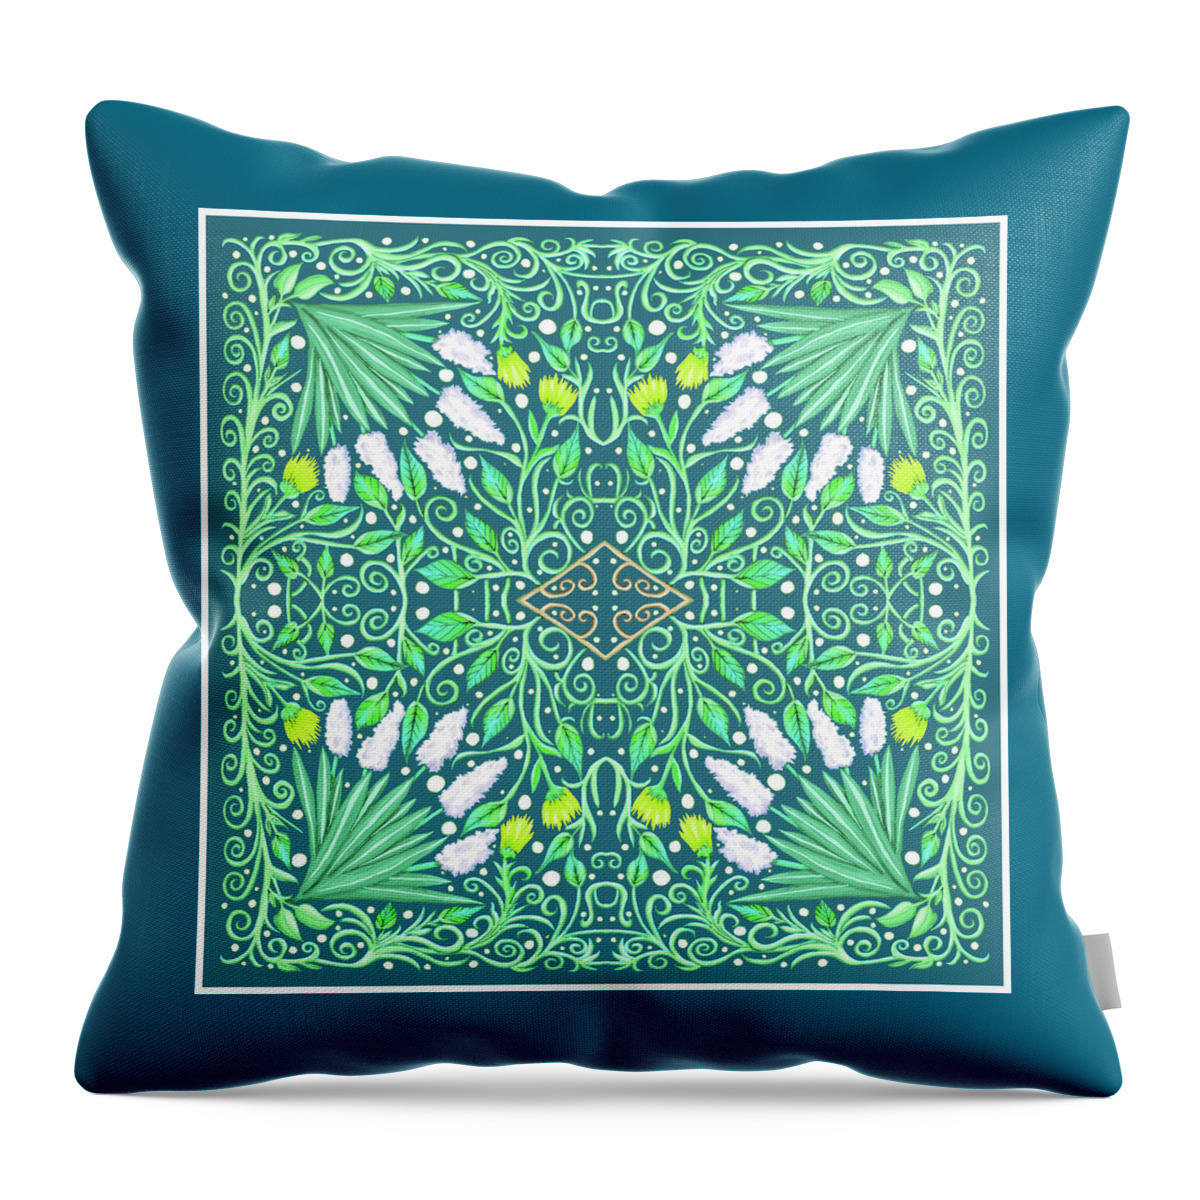 Turquoise Throw Pillow featuring the mixed media Green on Turquoise Floral Design with White and Yellow Flowers by Lise Winne